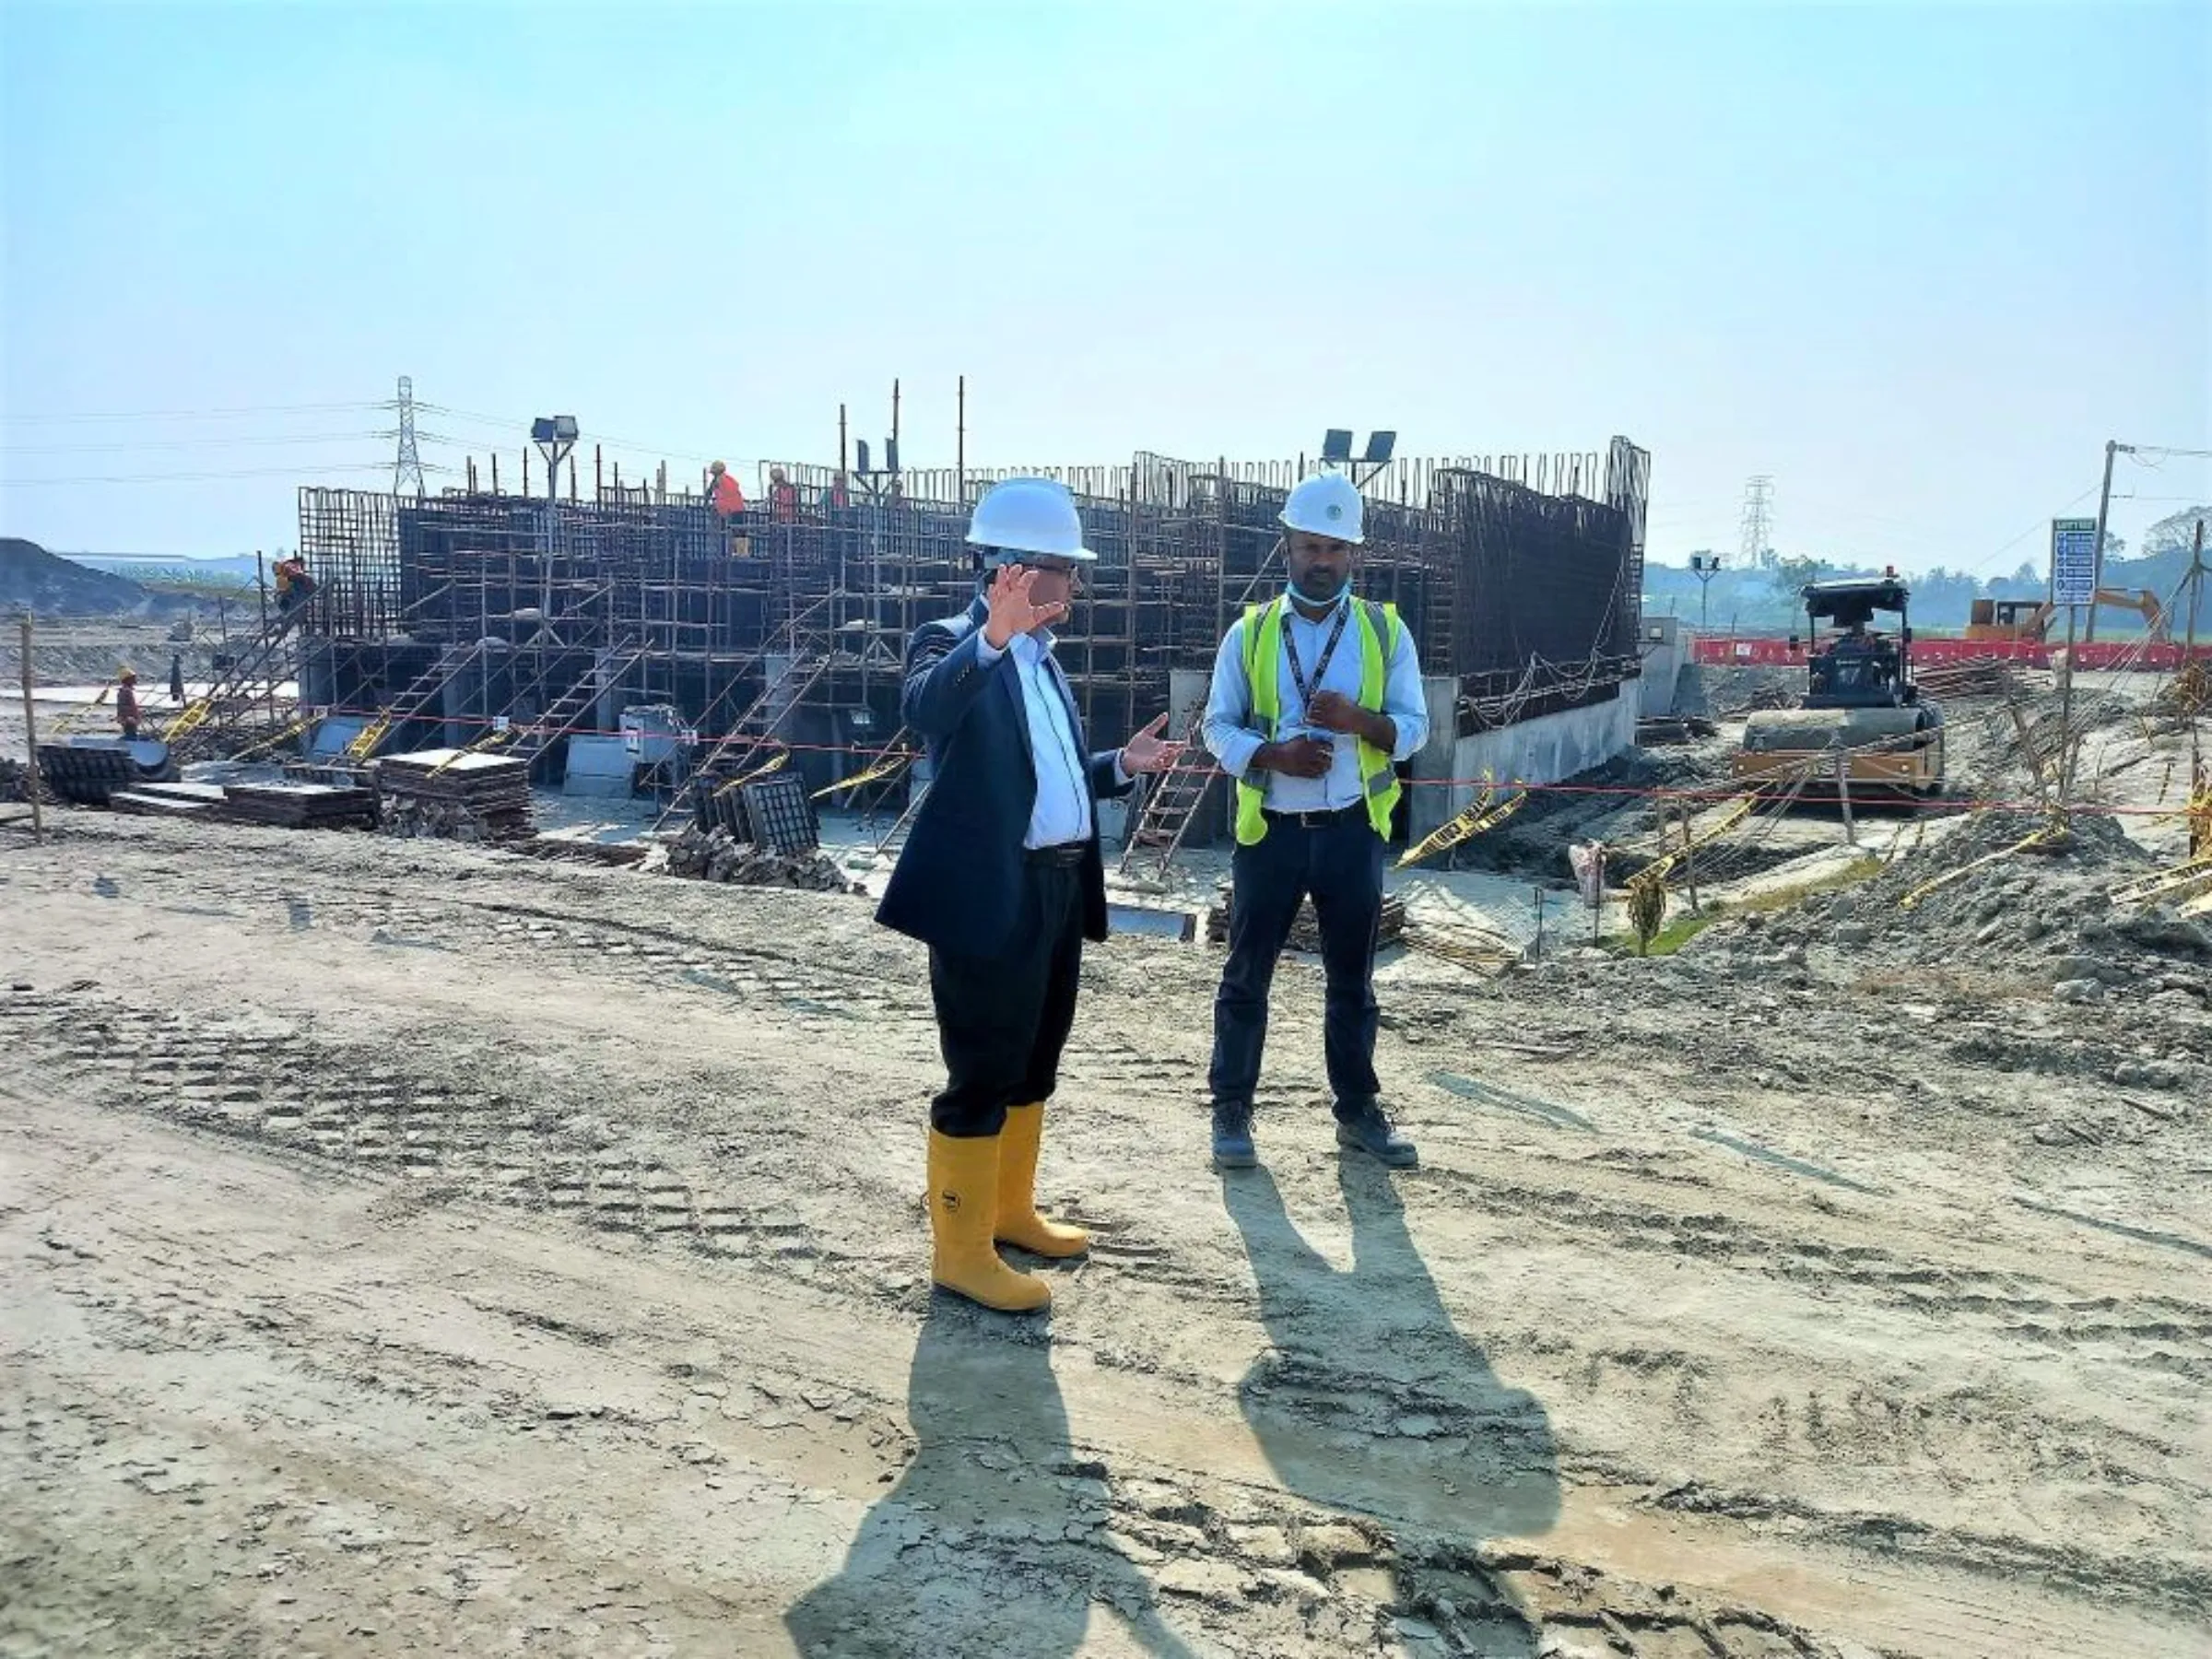 Saleh Ahmed, project director for the Japanese economic zone, talking to a technician at the construction site, Narayanganj, Bangladesh, January 11, 2022, Thomson Reuters Foundation/ Md. Tahmid Zami